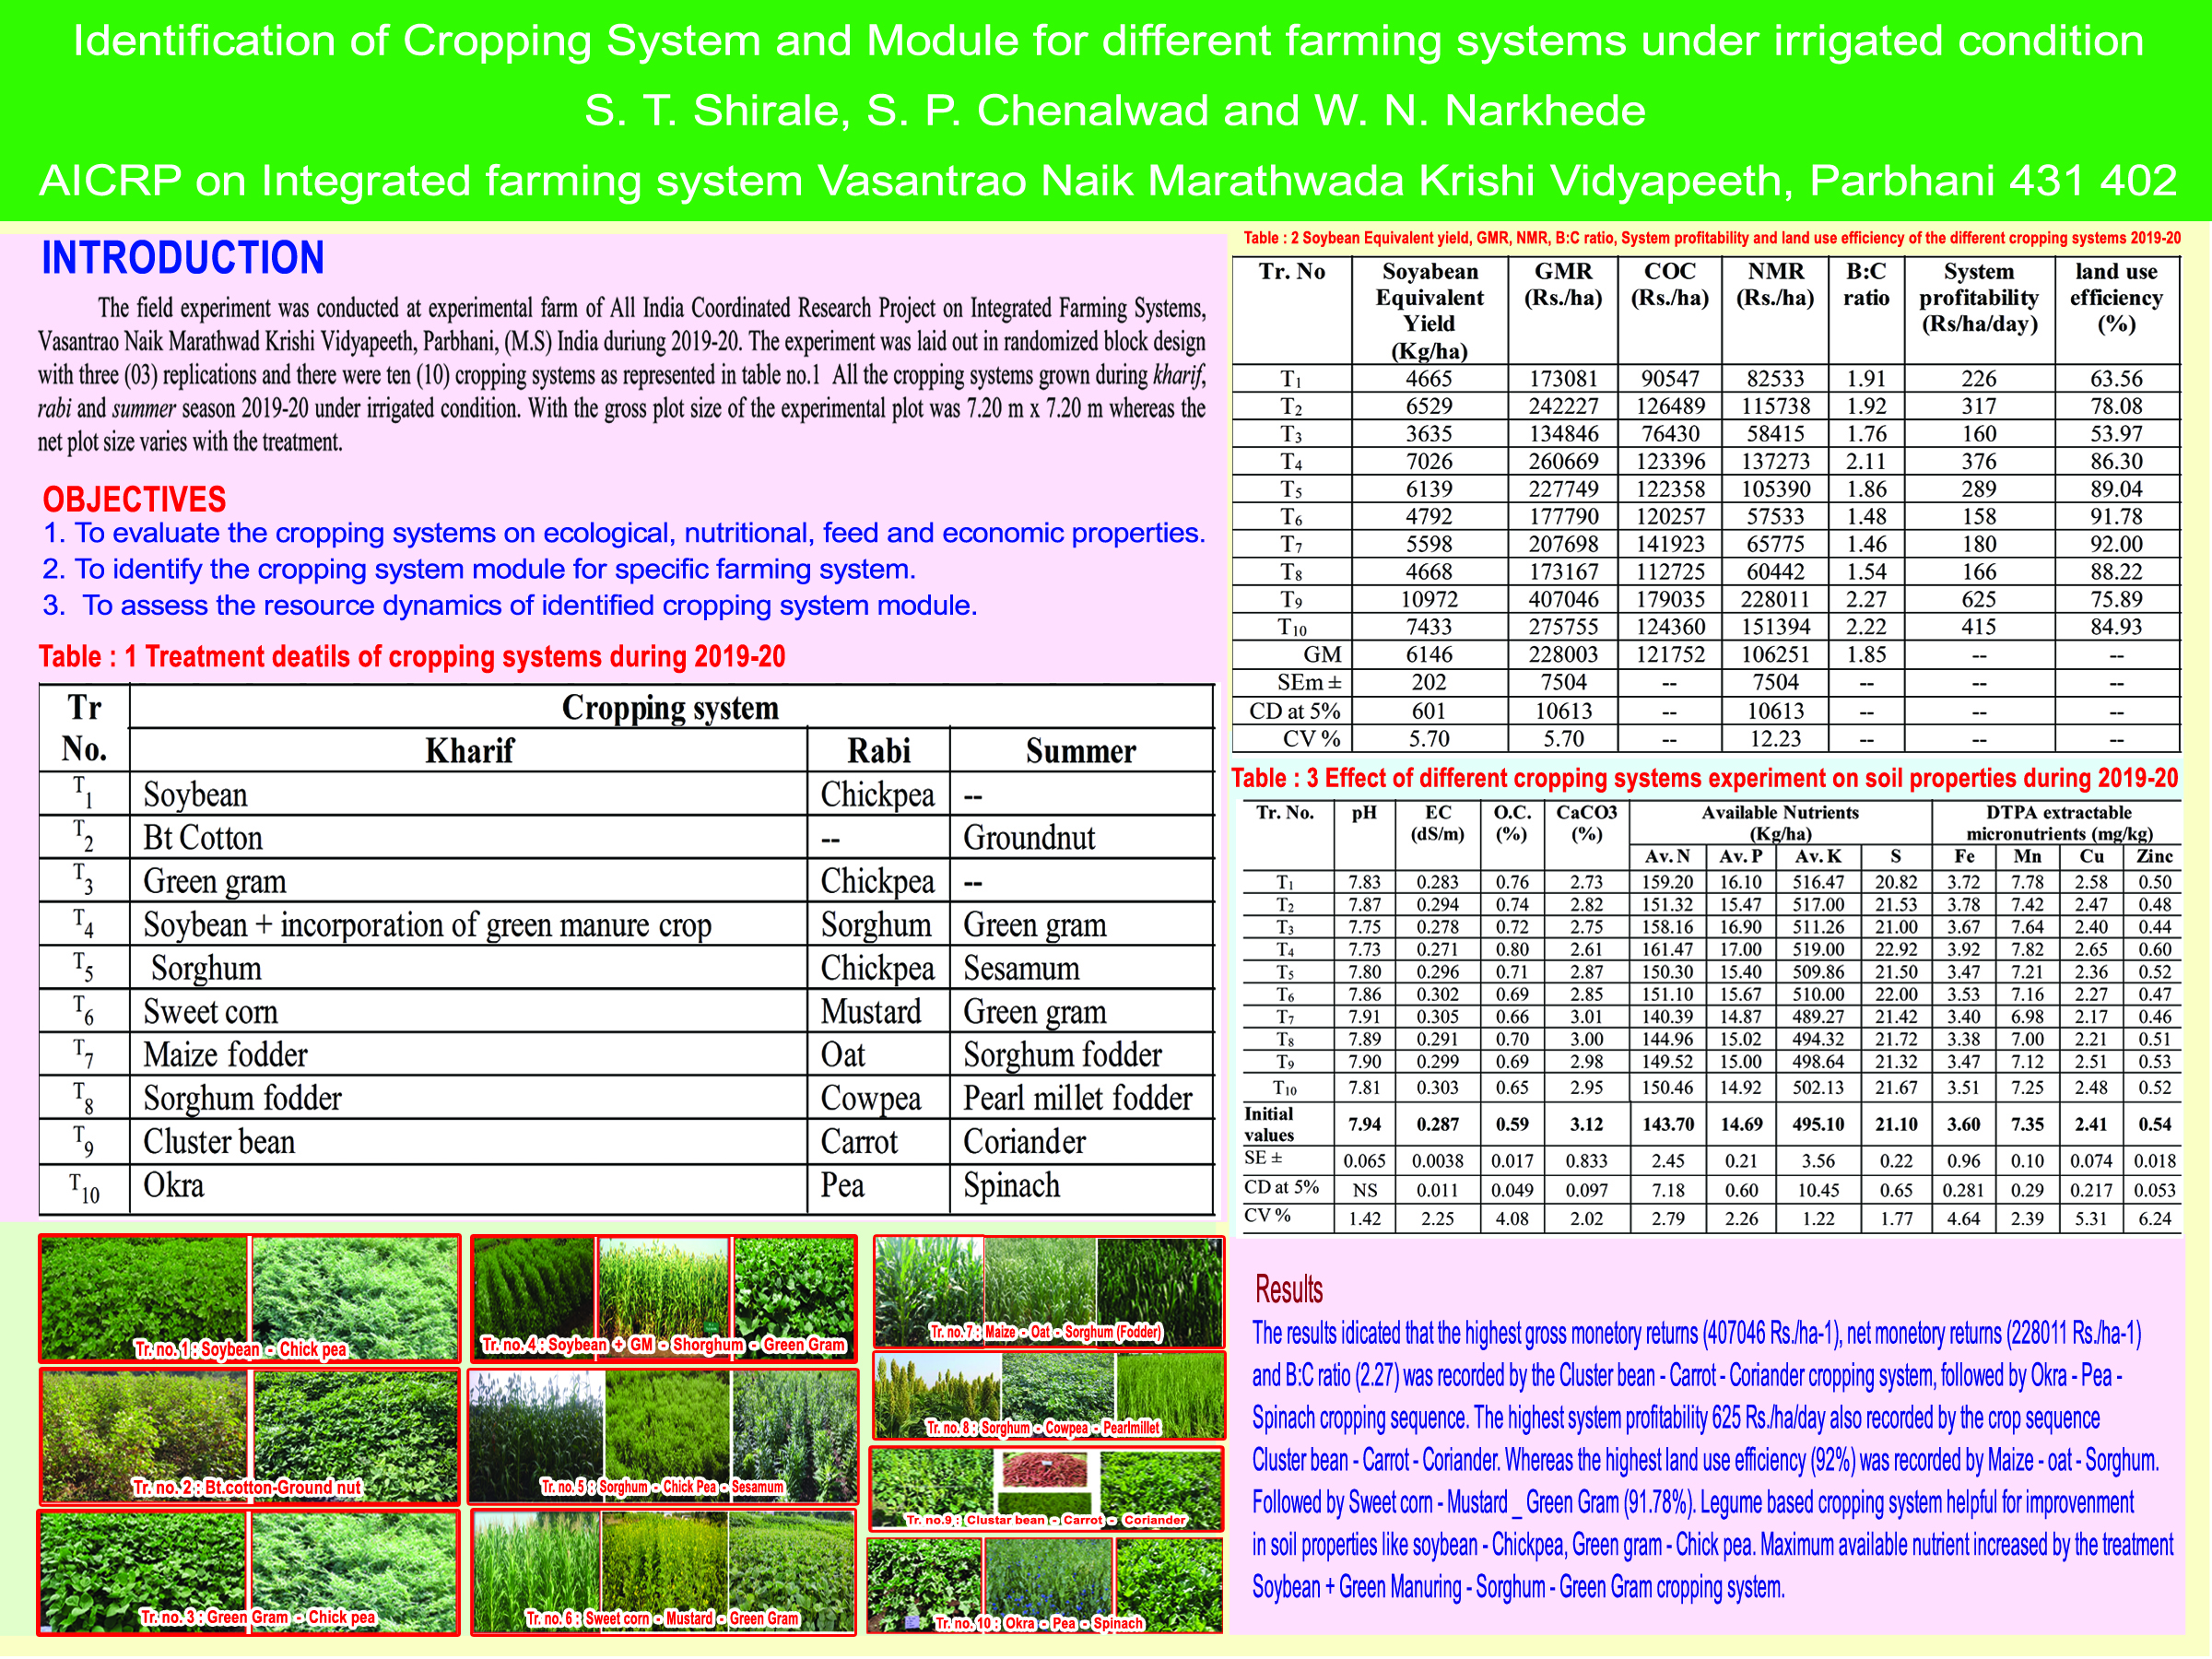 Identification of cropping system and module for different farming systems under irrigated condition